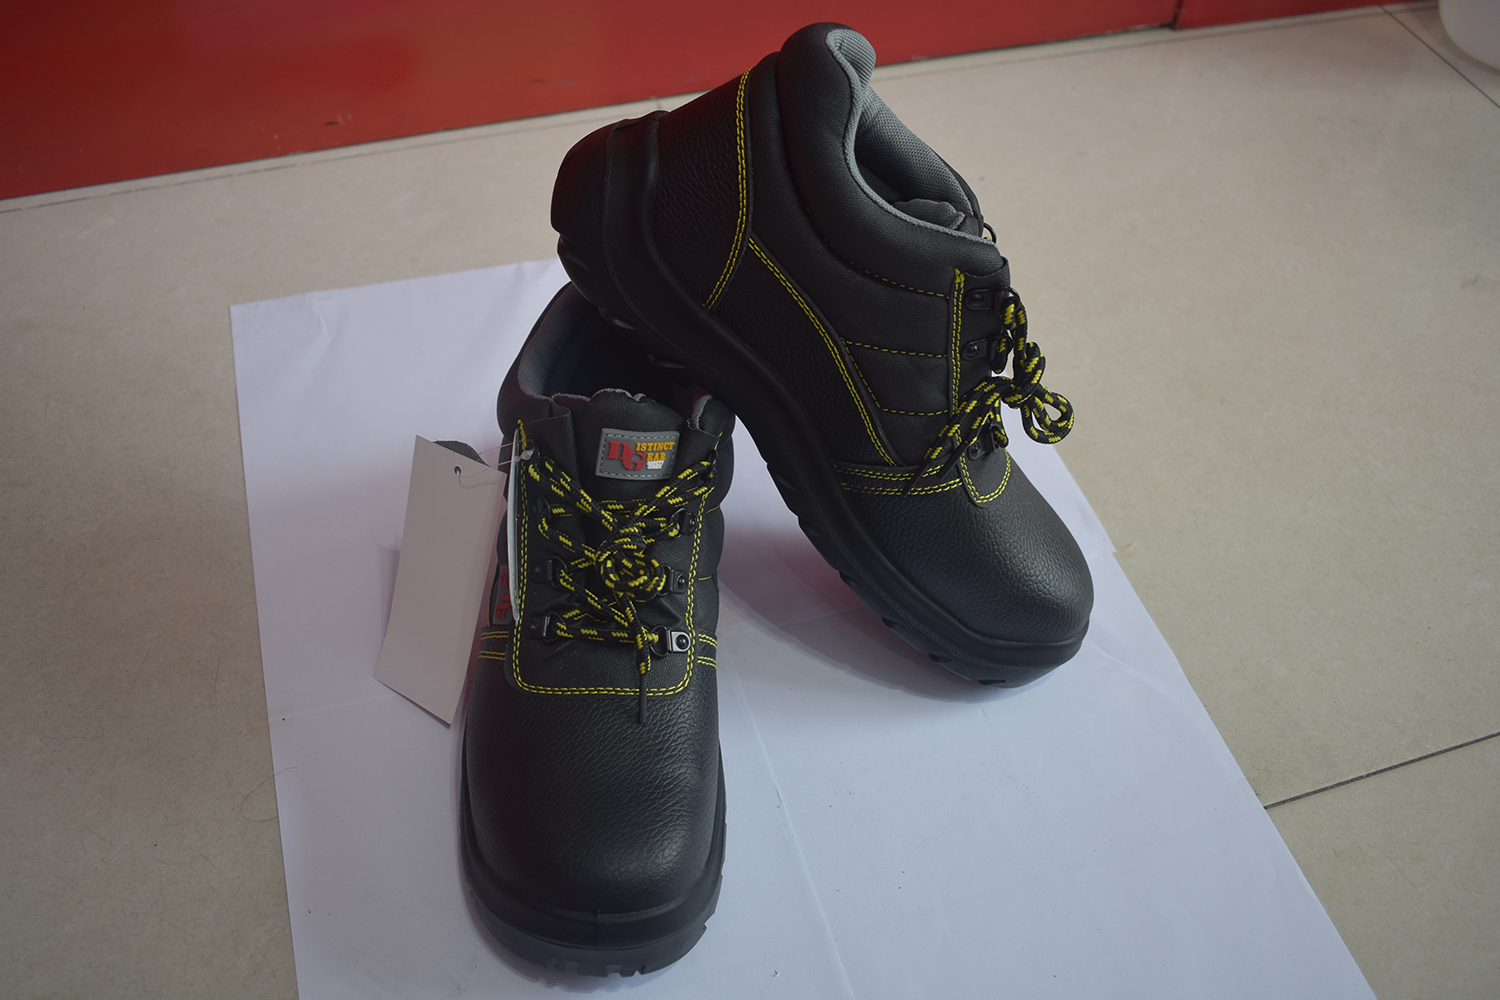 distinct gear safety shoes